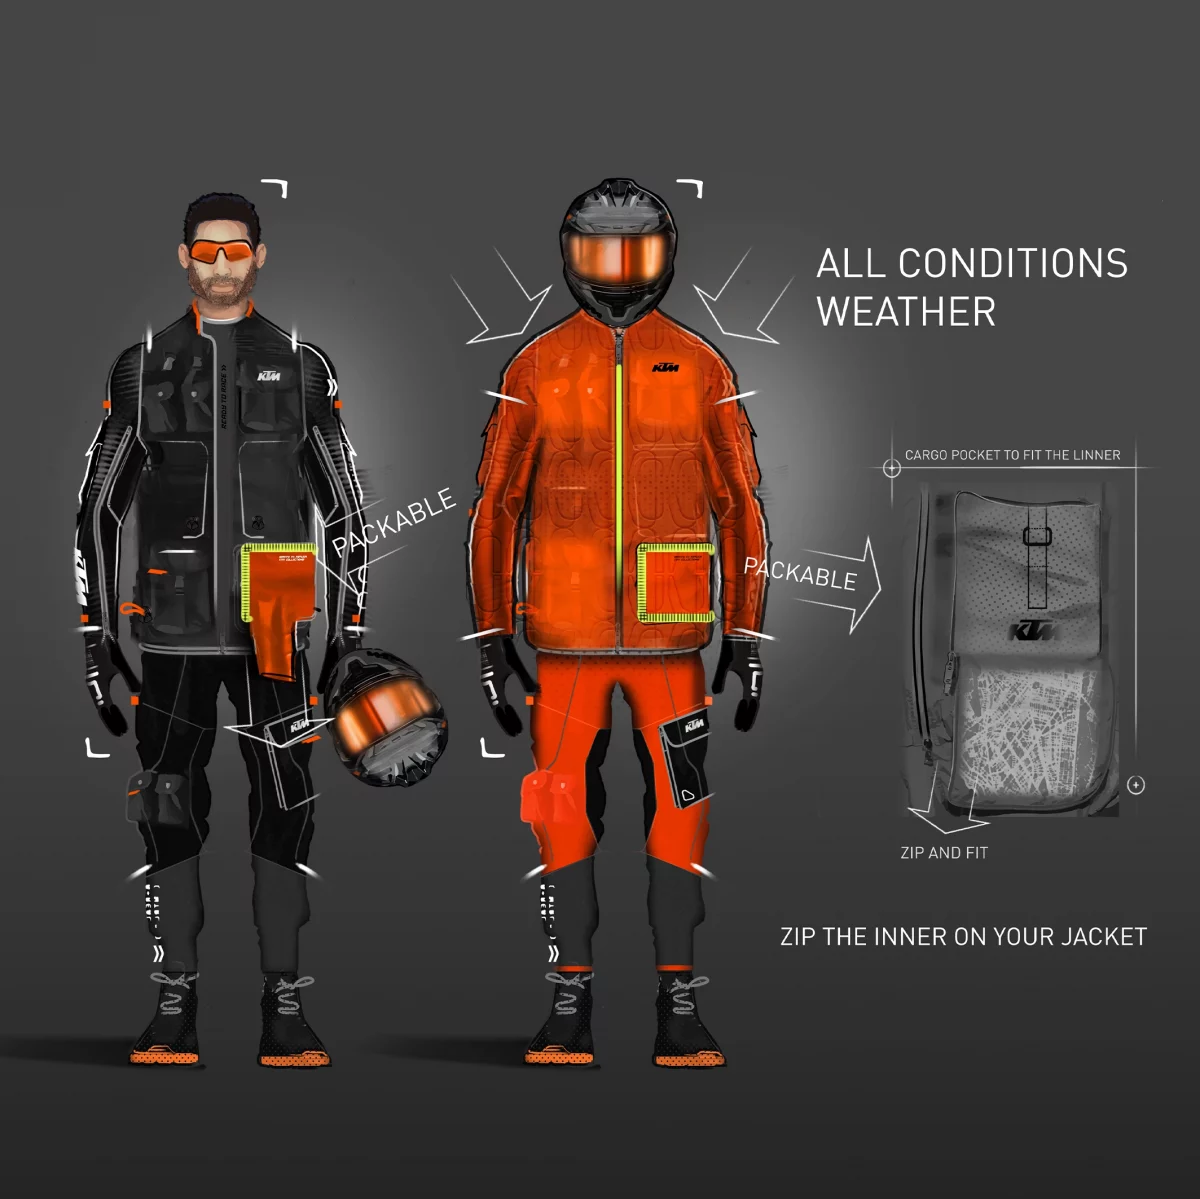 4_KTM_Terra_Adventure_Jacket_Functions_All_Conditions_Weather_technical_details_Square